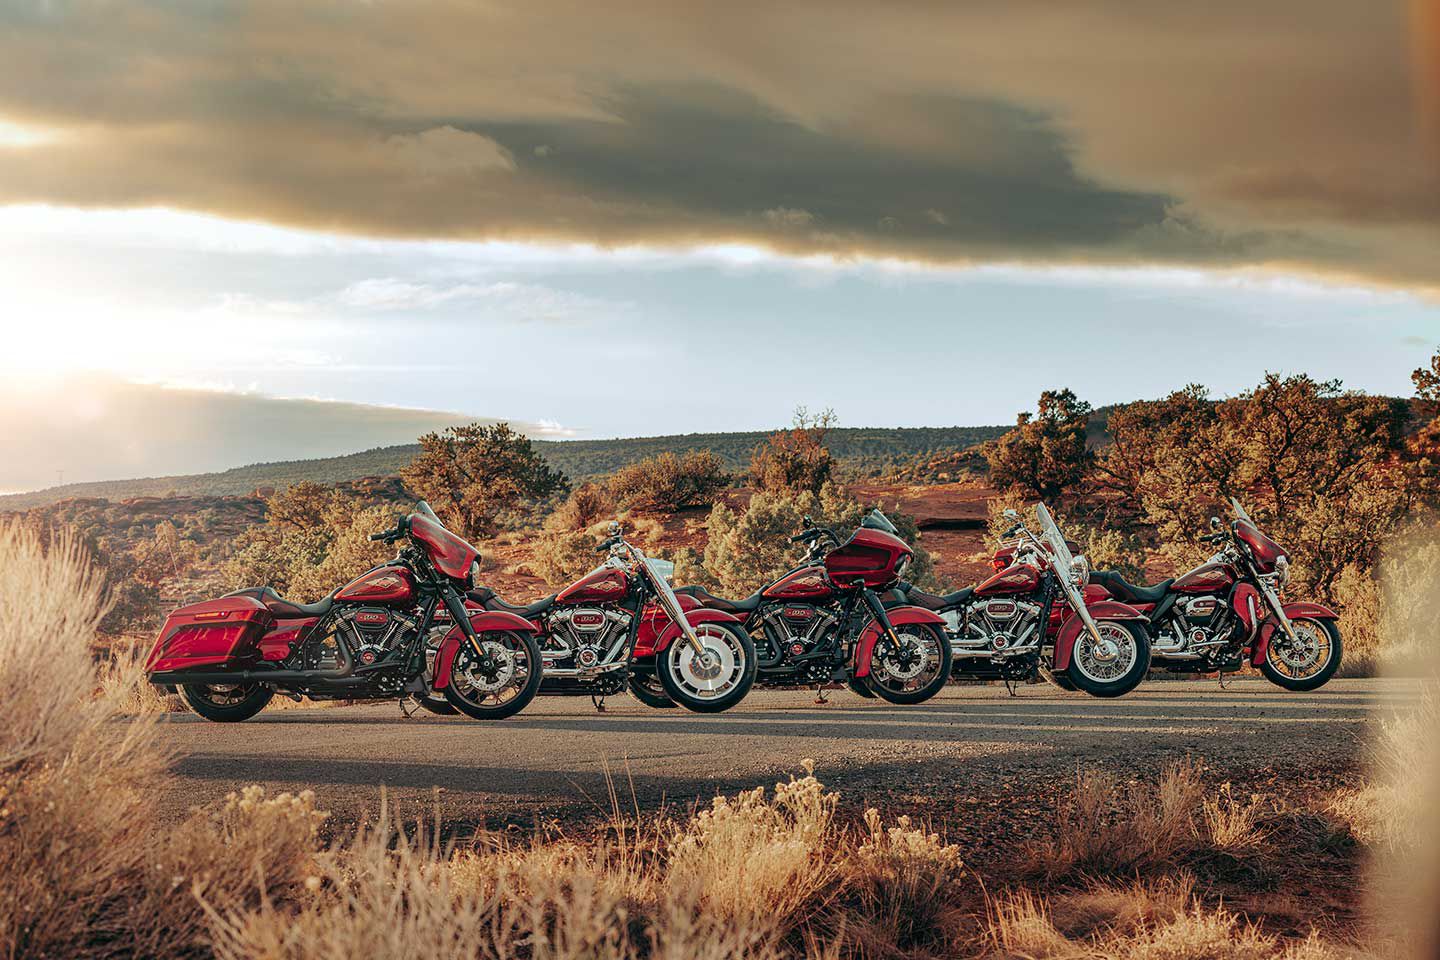 The 2023 Harley-Davidson 120th Anniversary lineup, from left to right: Street Glide Special, Fat Boy, Road Glide Special, Heritage Classic, Ultra Limited. Not pictured is the Tri Glide Ultra.